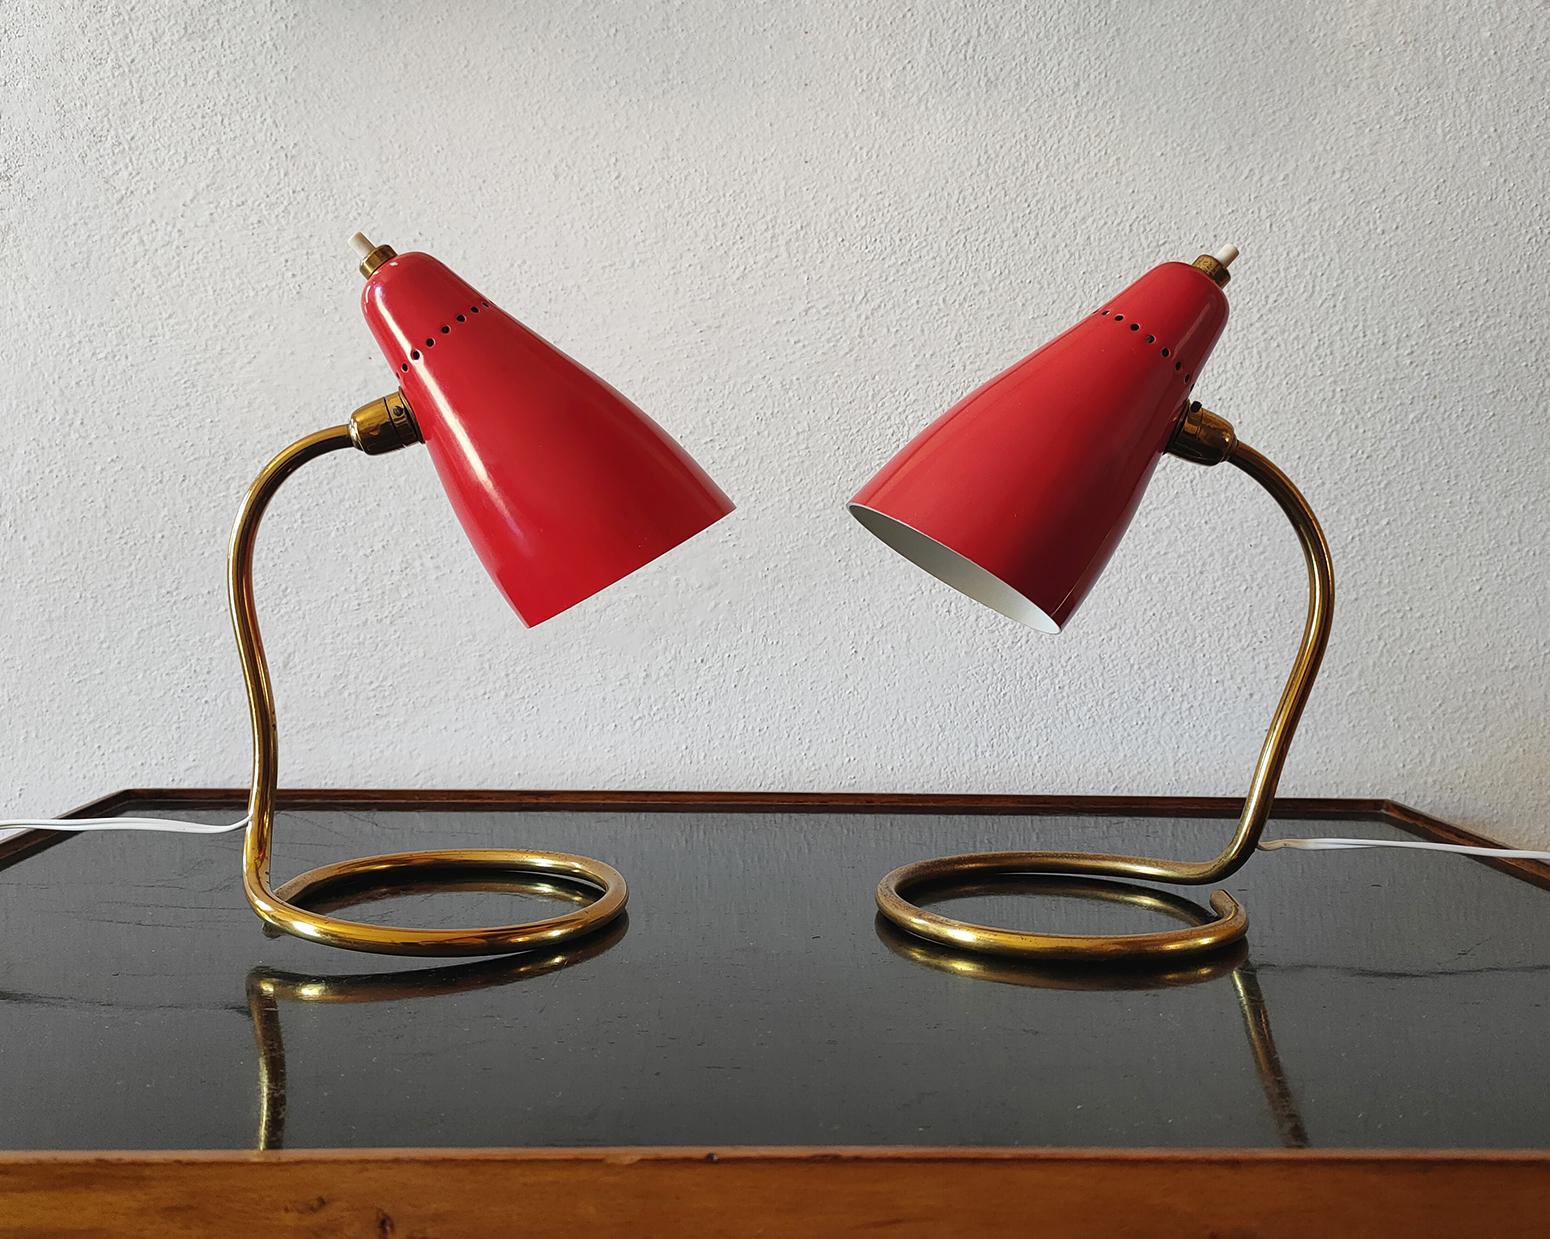 Giuseppe Ostuni Set of Two Table Lamps 214 or Vipere by O-luce 1950s Italy In Good Condition For Sale In Montecatini Terme, IT